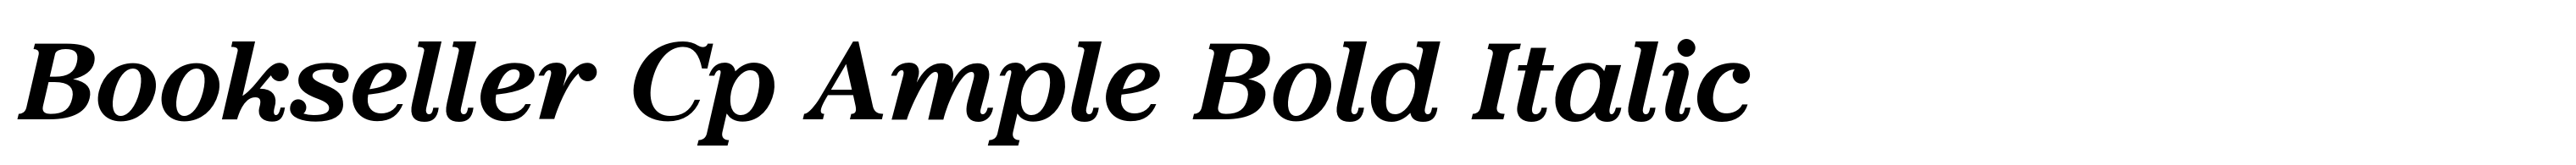 Bookseller Cp Ample Bold Italic